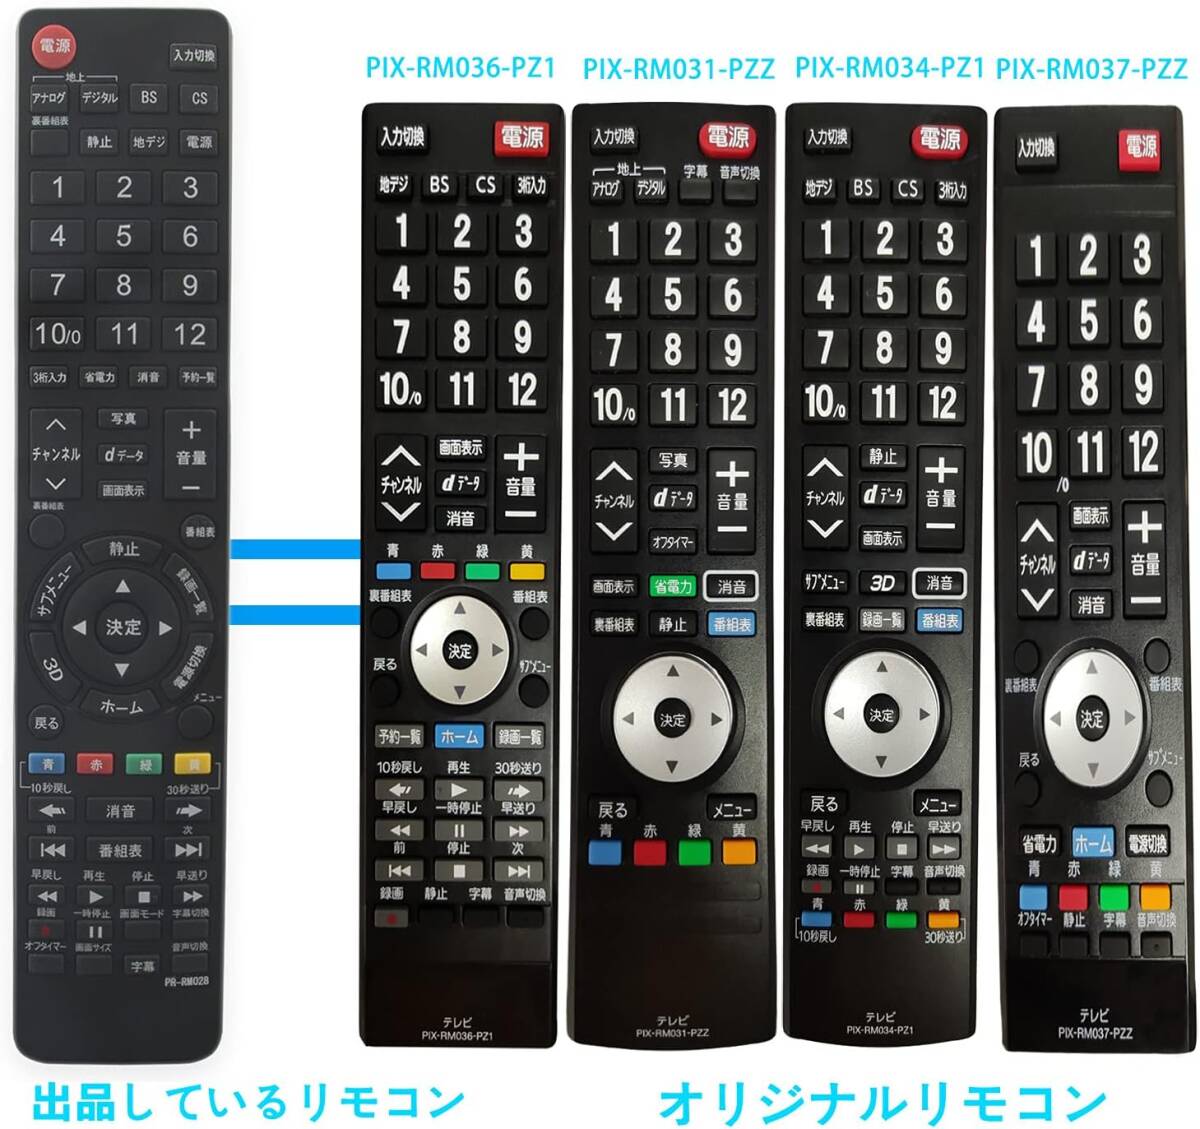 AULCMEET液晶テレビ用リモコン fit for PRODIA ピクセラPIX-RM024-PA1 PIX-RM028-PA1 PIX-RM033-PZ1 PIX-RM036-PZ1 PIX-RM031-PZZの画像5